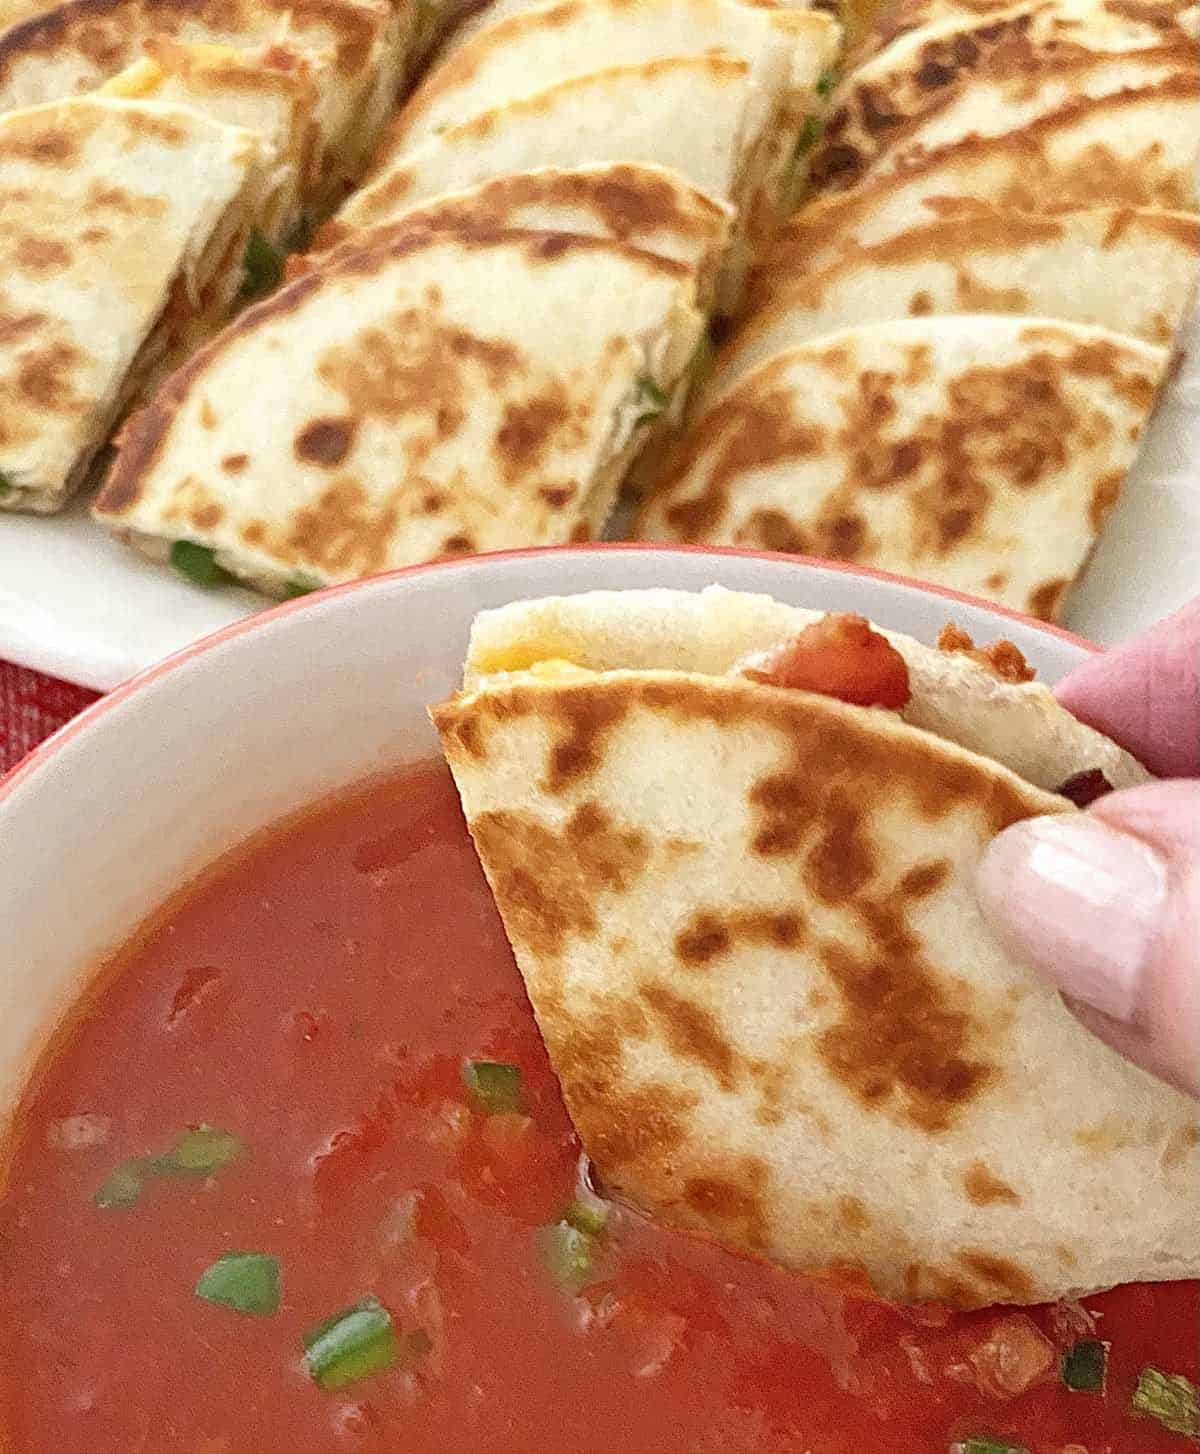 Dipping a quartered mini quesadilla with bacon and cheese in a bowl of salsa, with more quesadillas in the background on a platter.